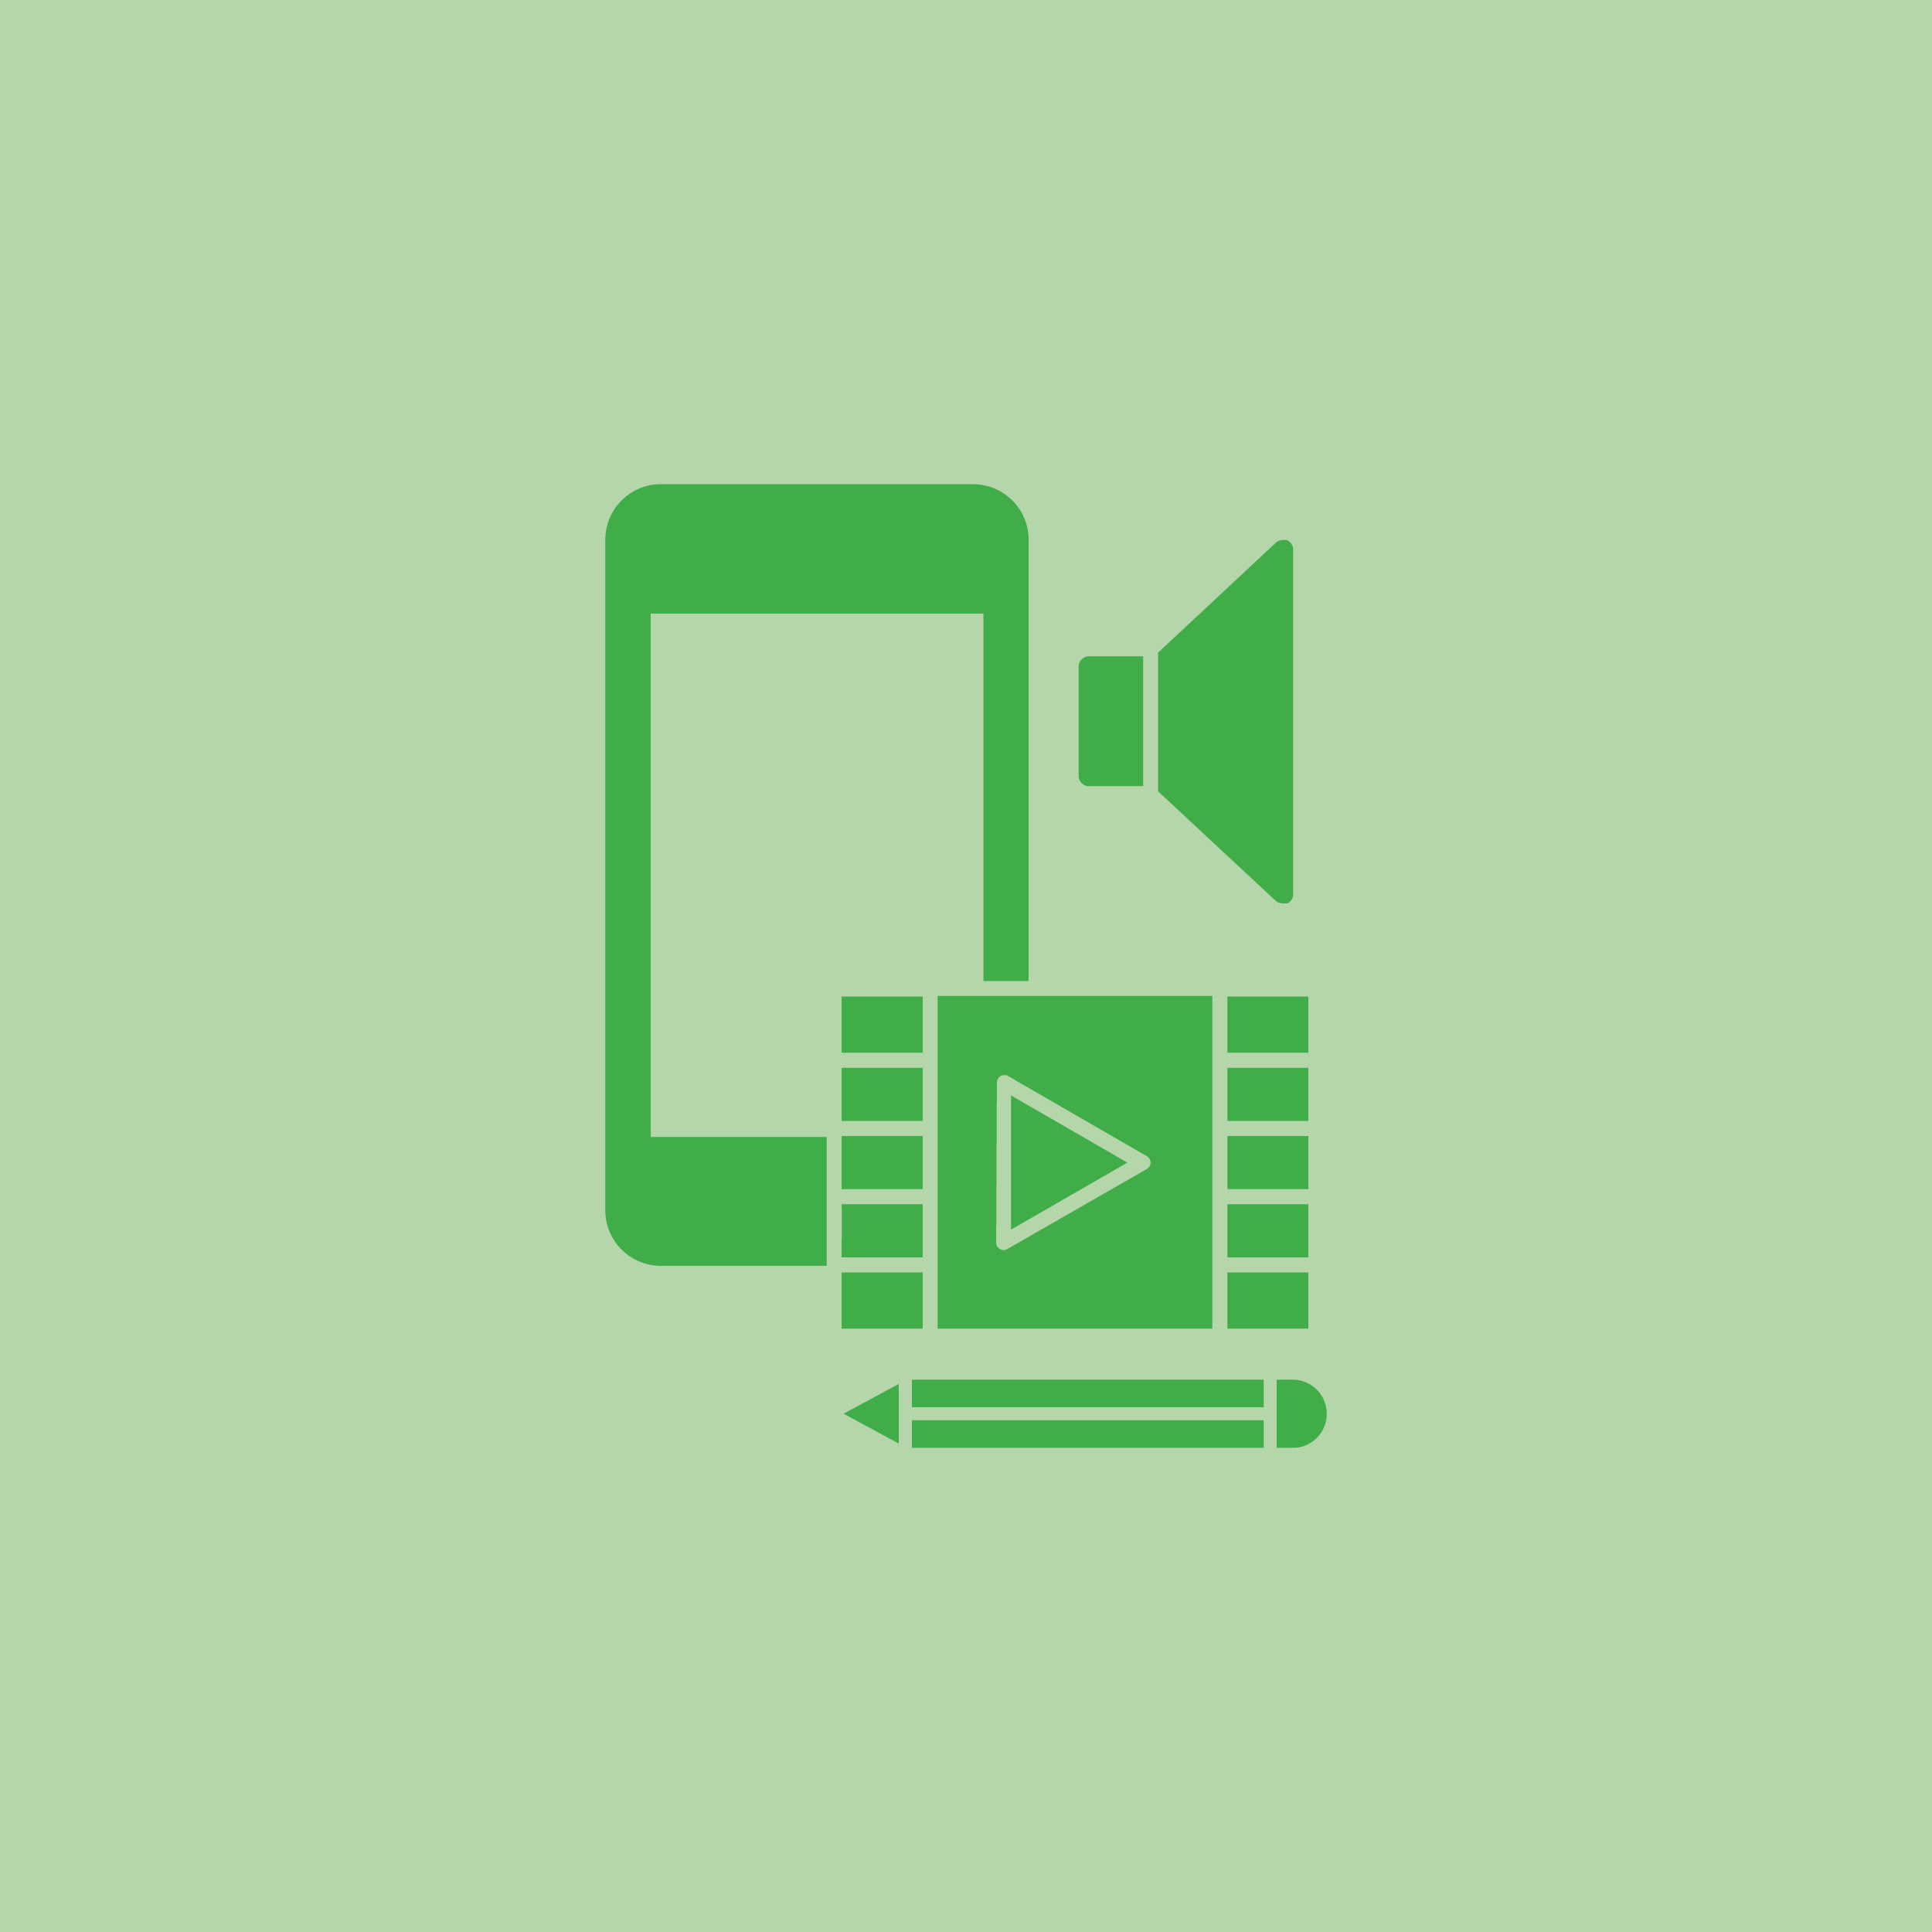 Green graphic of phone, volume symbol, play button, and pencil